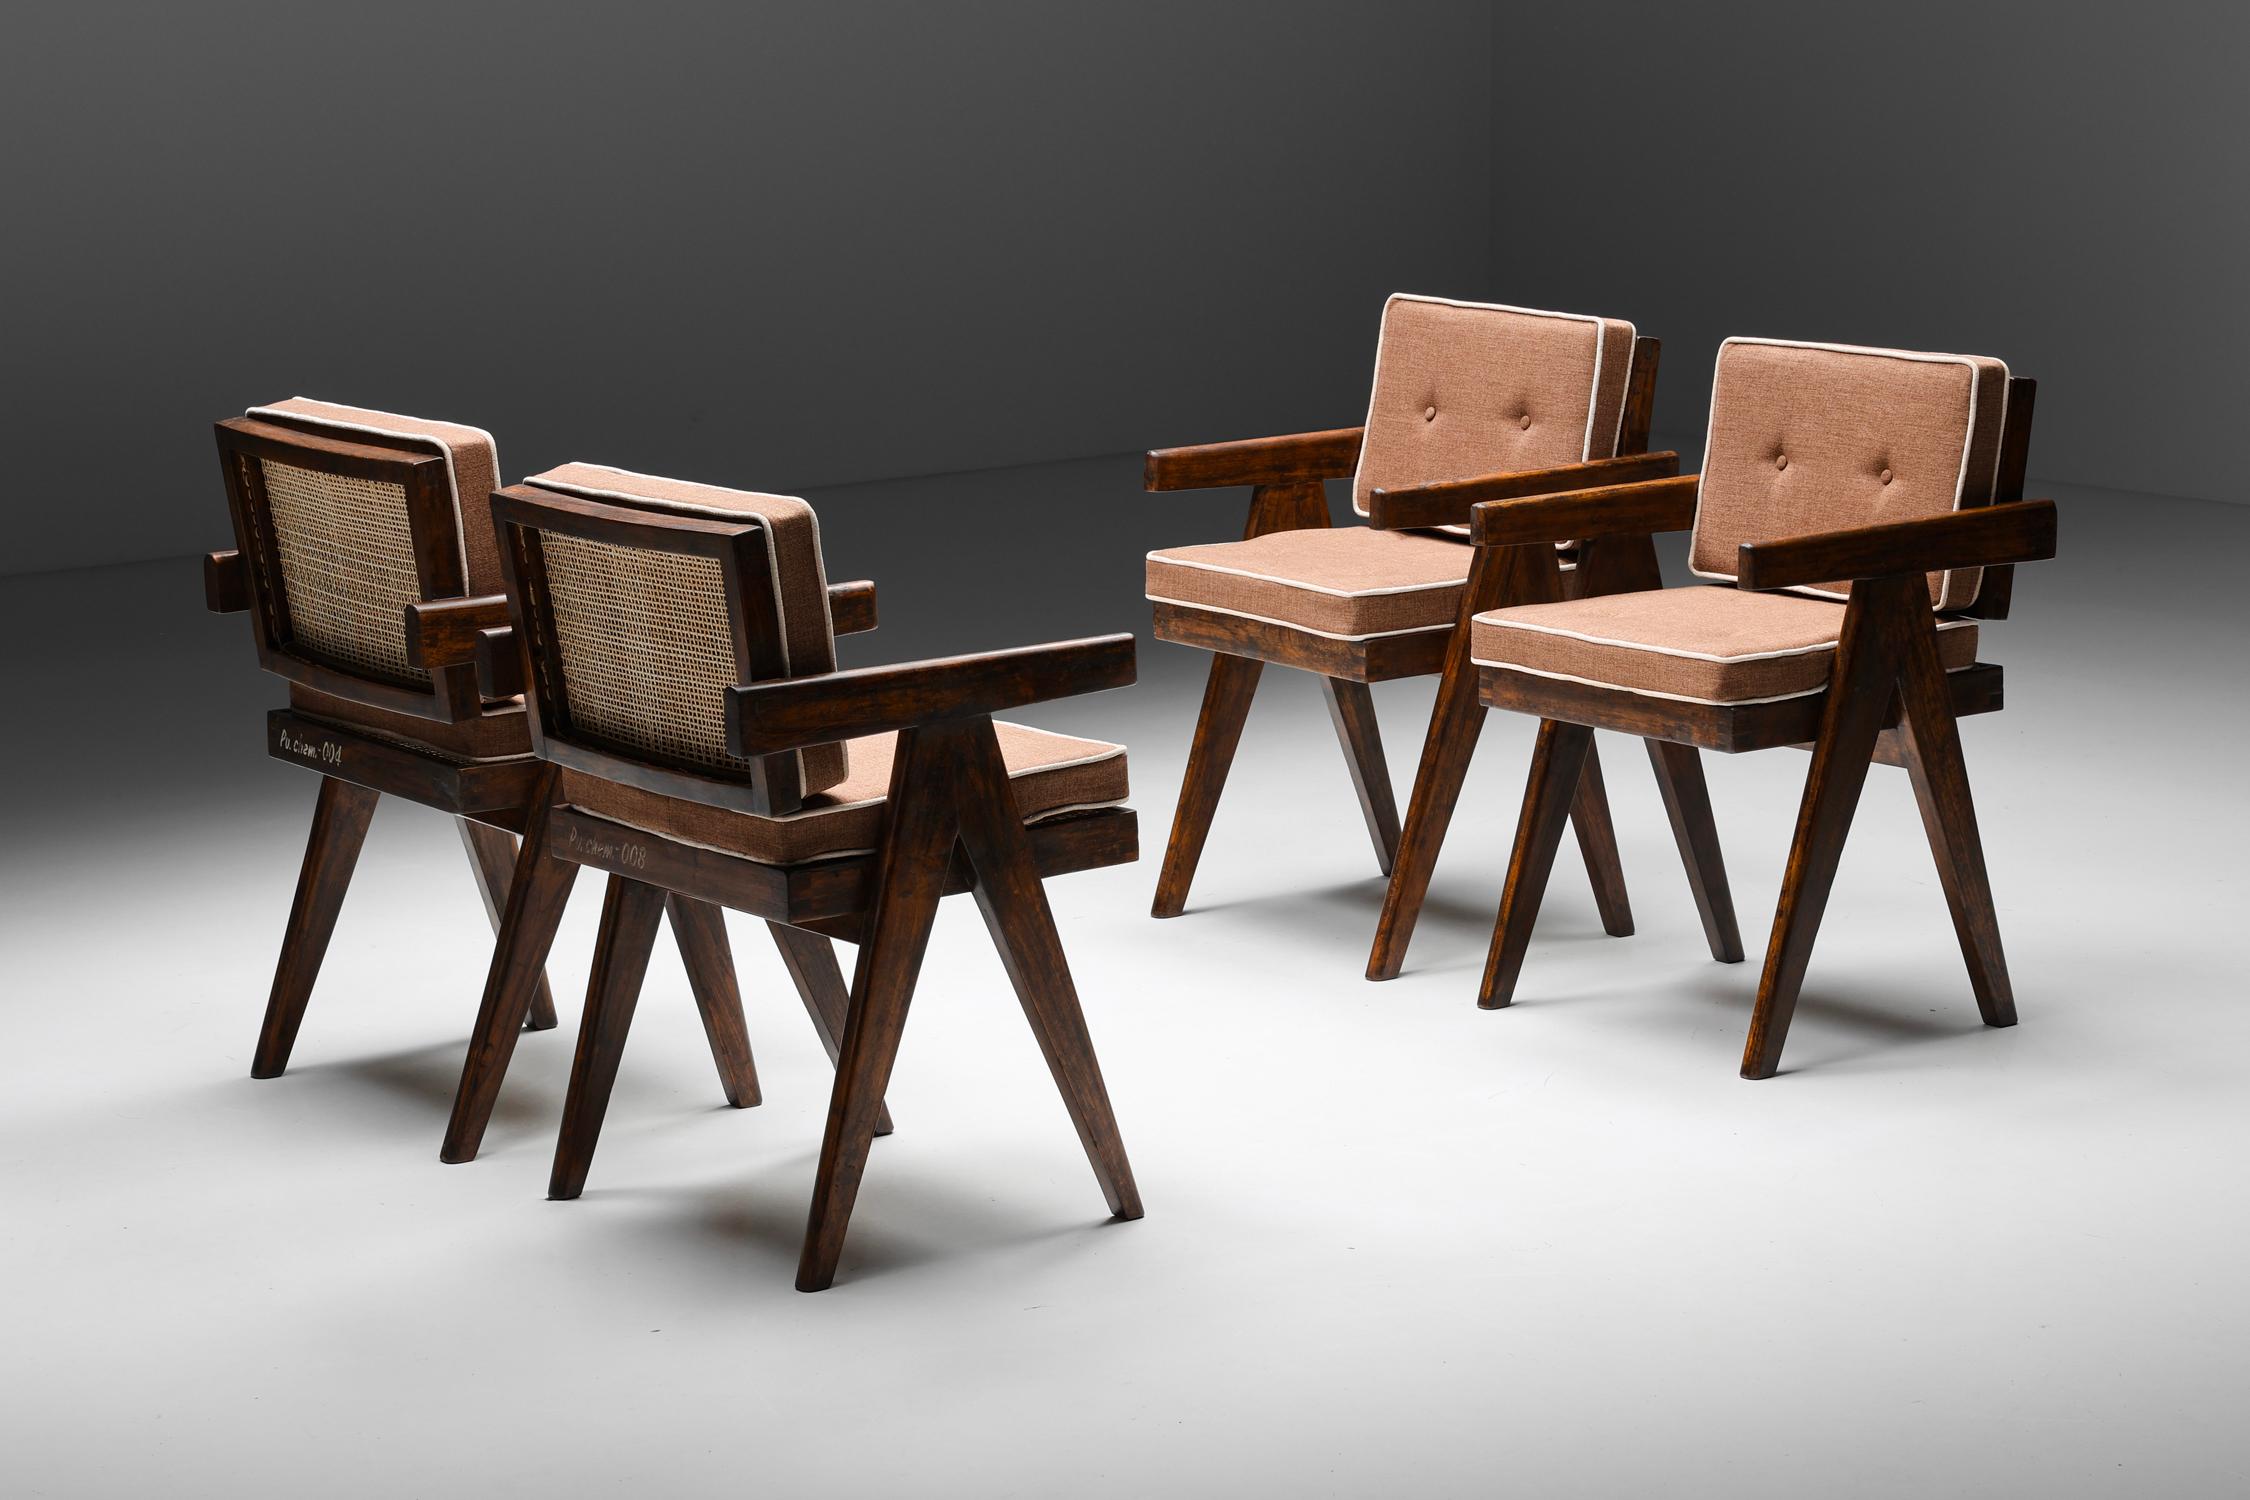 Mid-20th Century Office Cane Chairs by Pierre Jeanneret, PJ-SI-28-A, Rosewood, Chandigarh, 1955